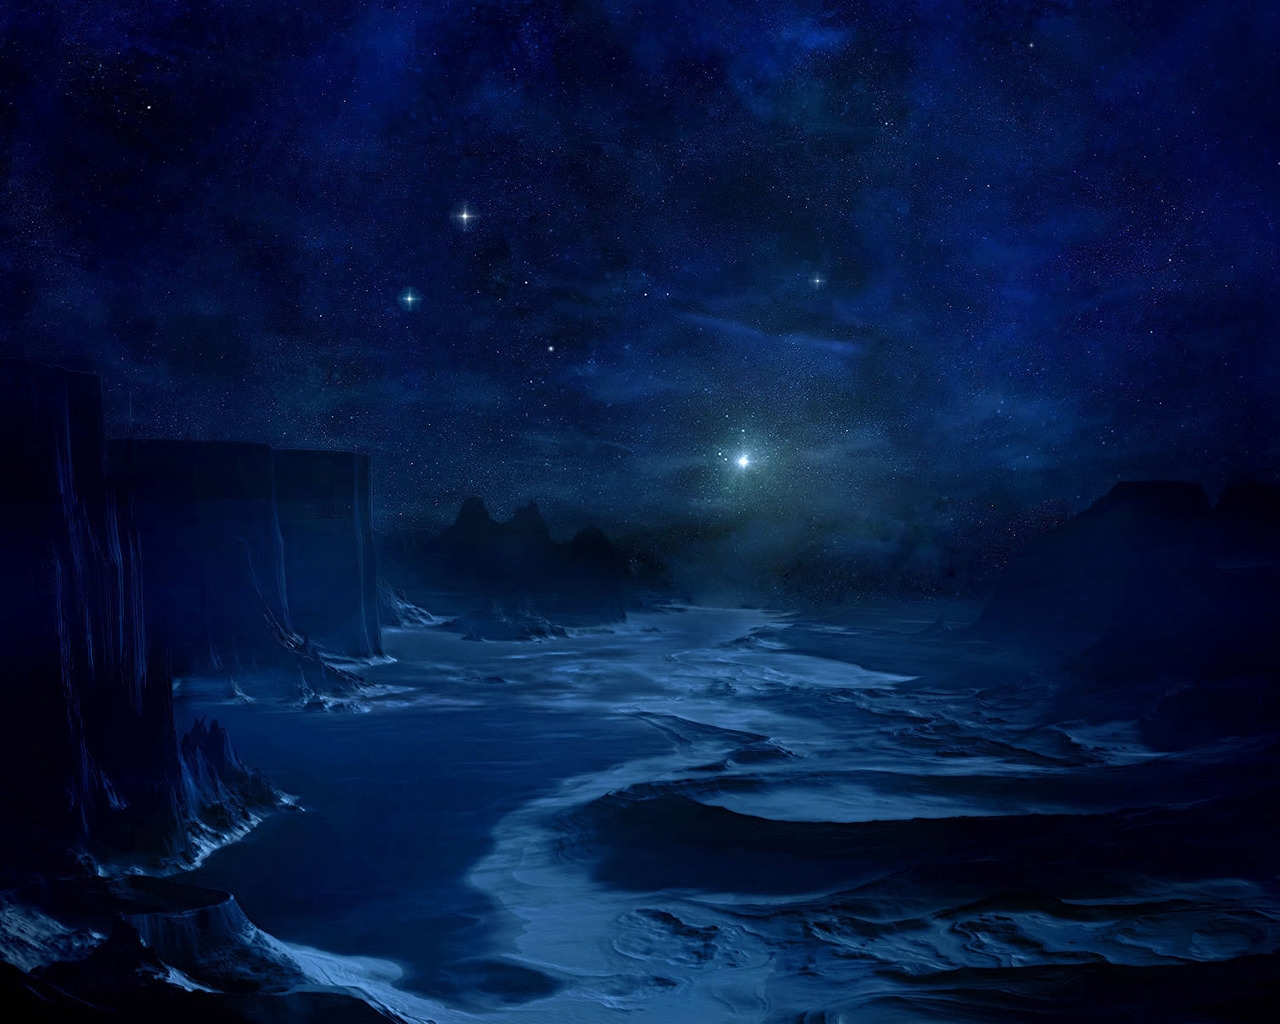 The Blue Cold Night for 1280 x 1024 resolution